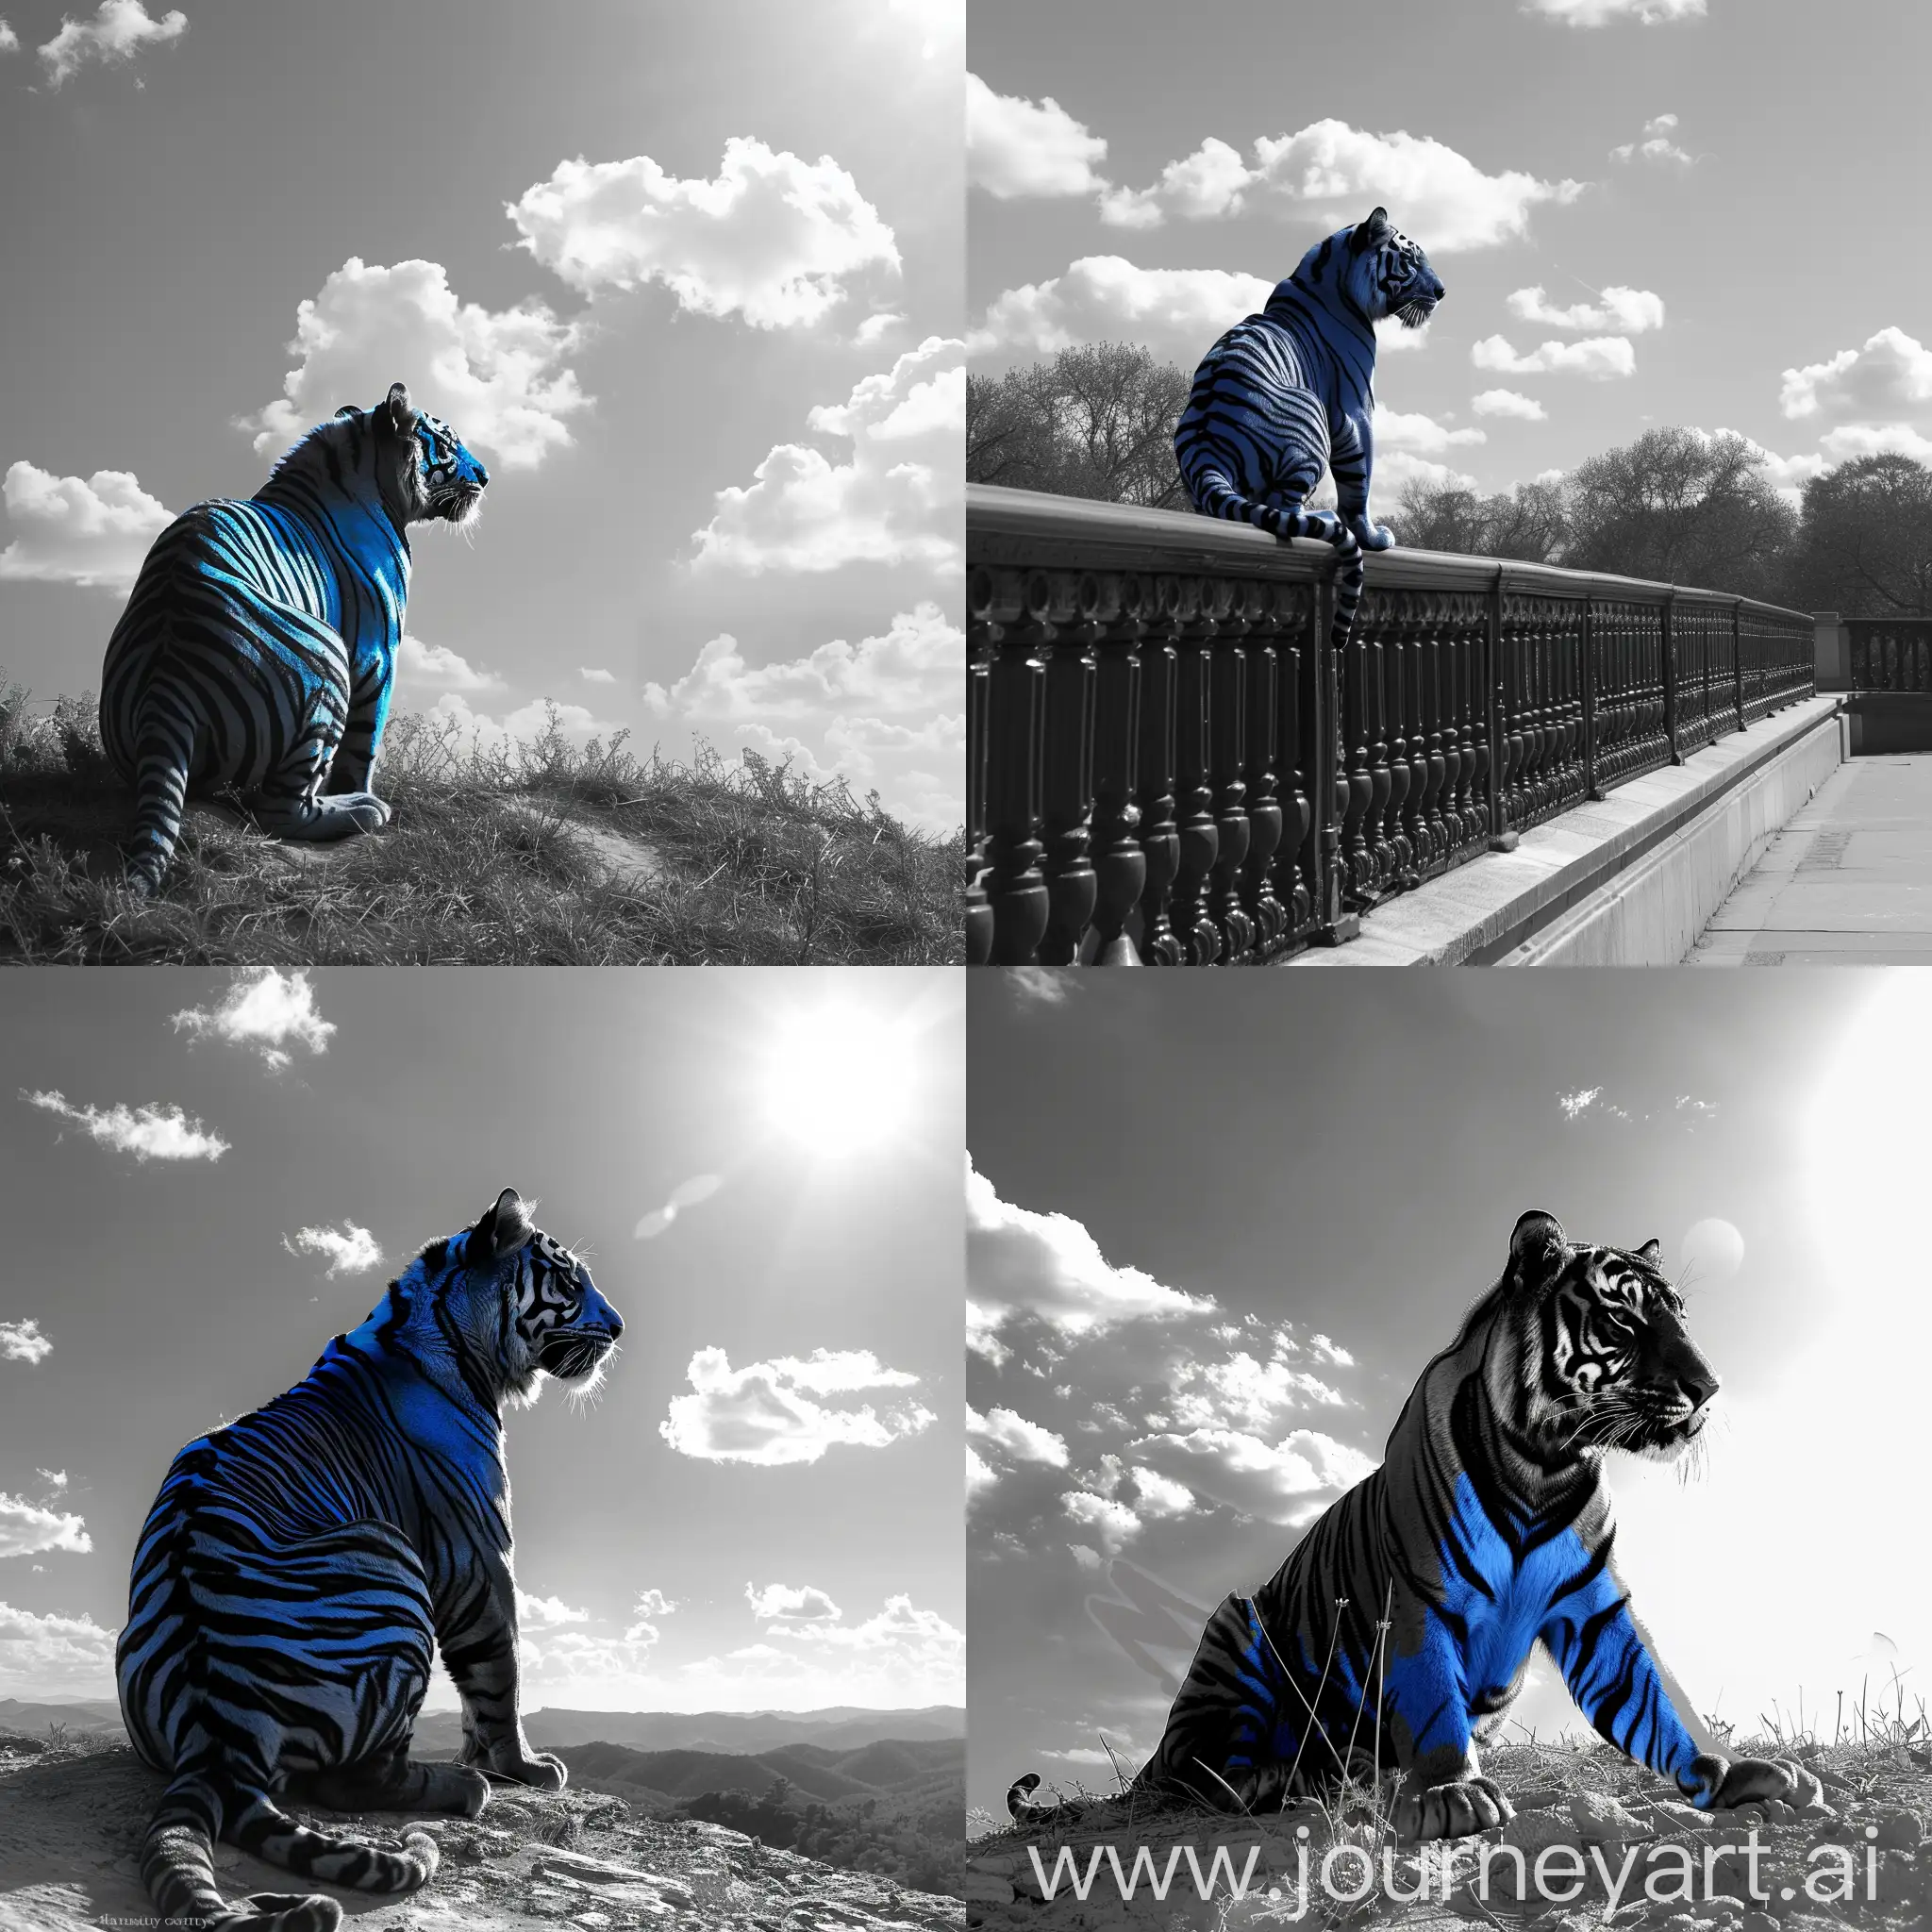 A sunny day in black and white with a lone blue and black tiger on the prowel